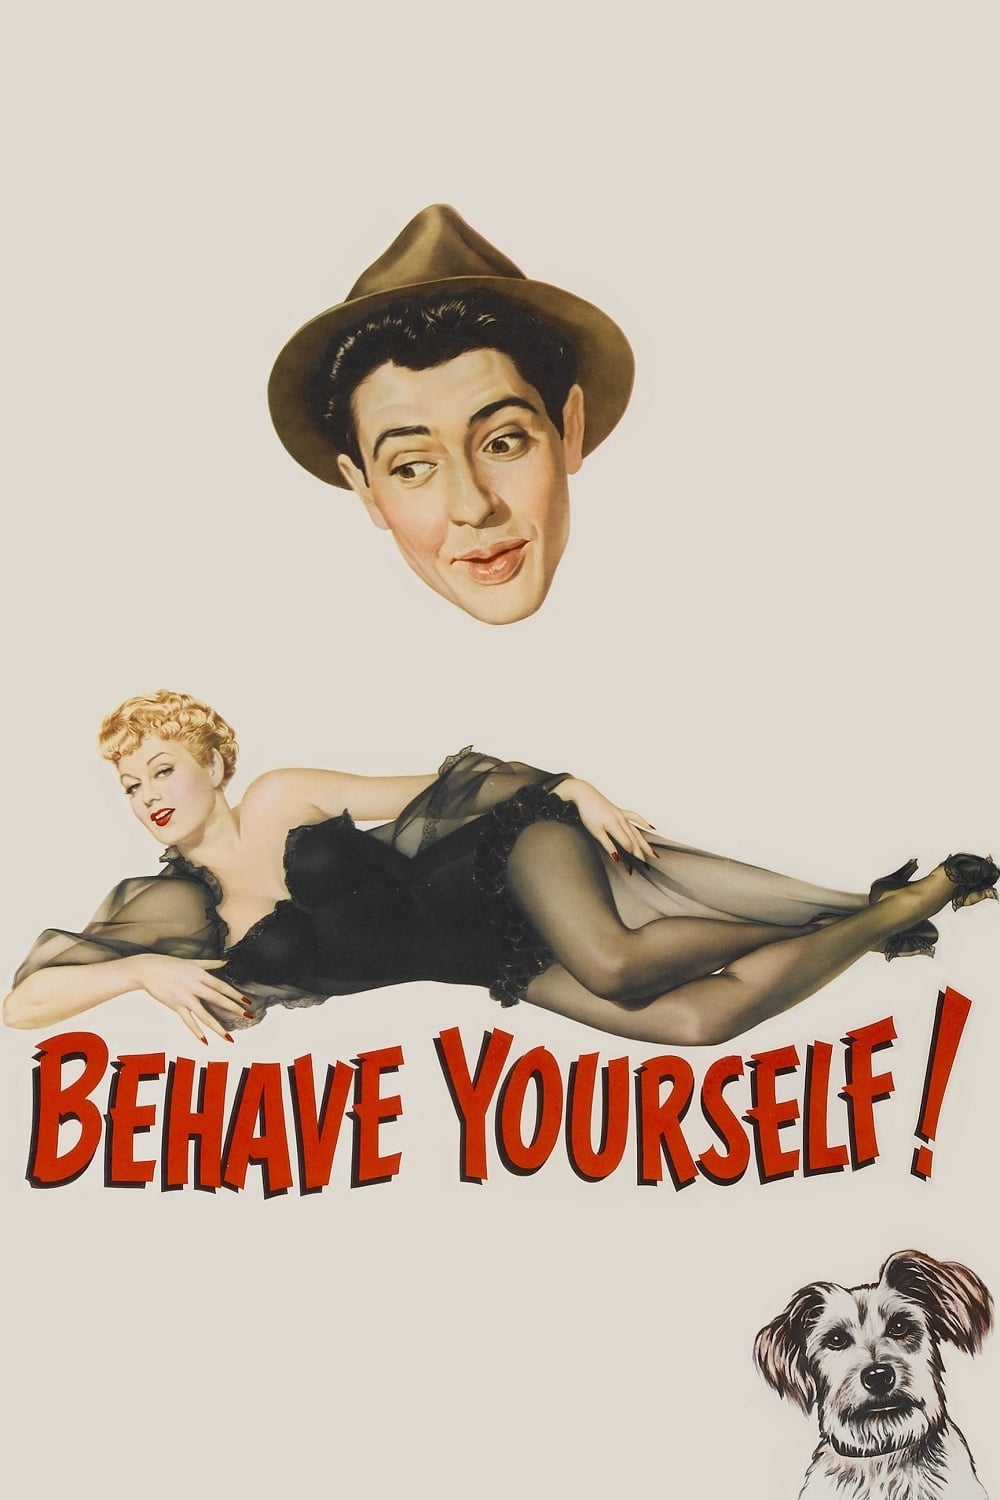 Behave Yourself!